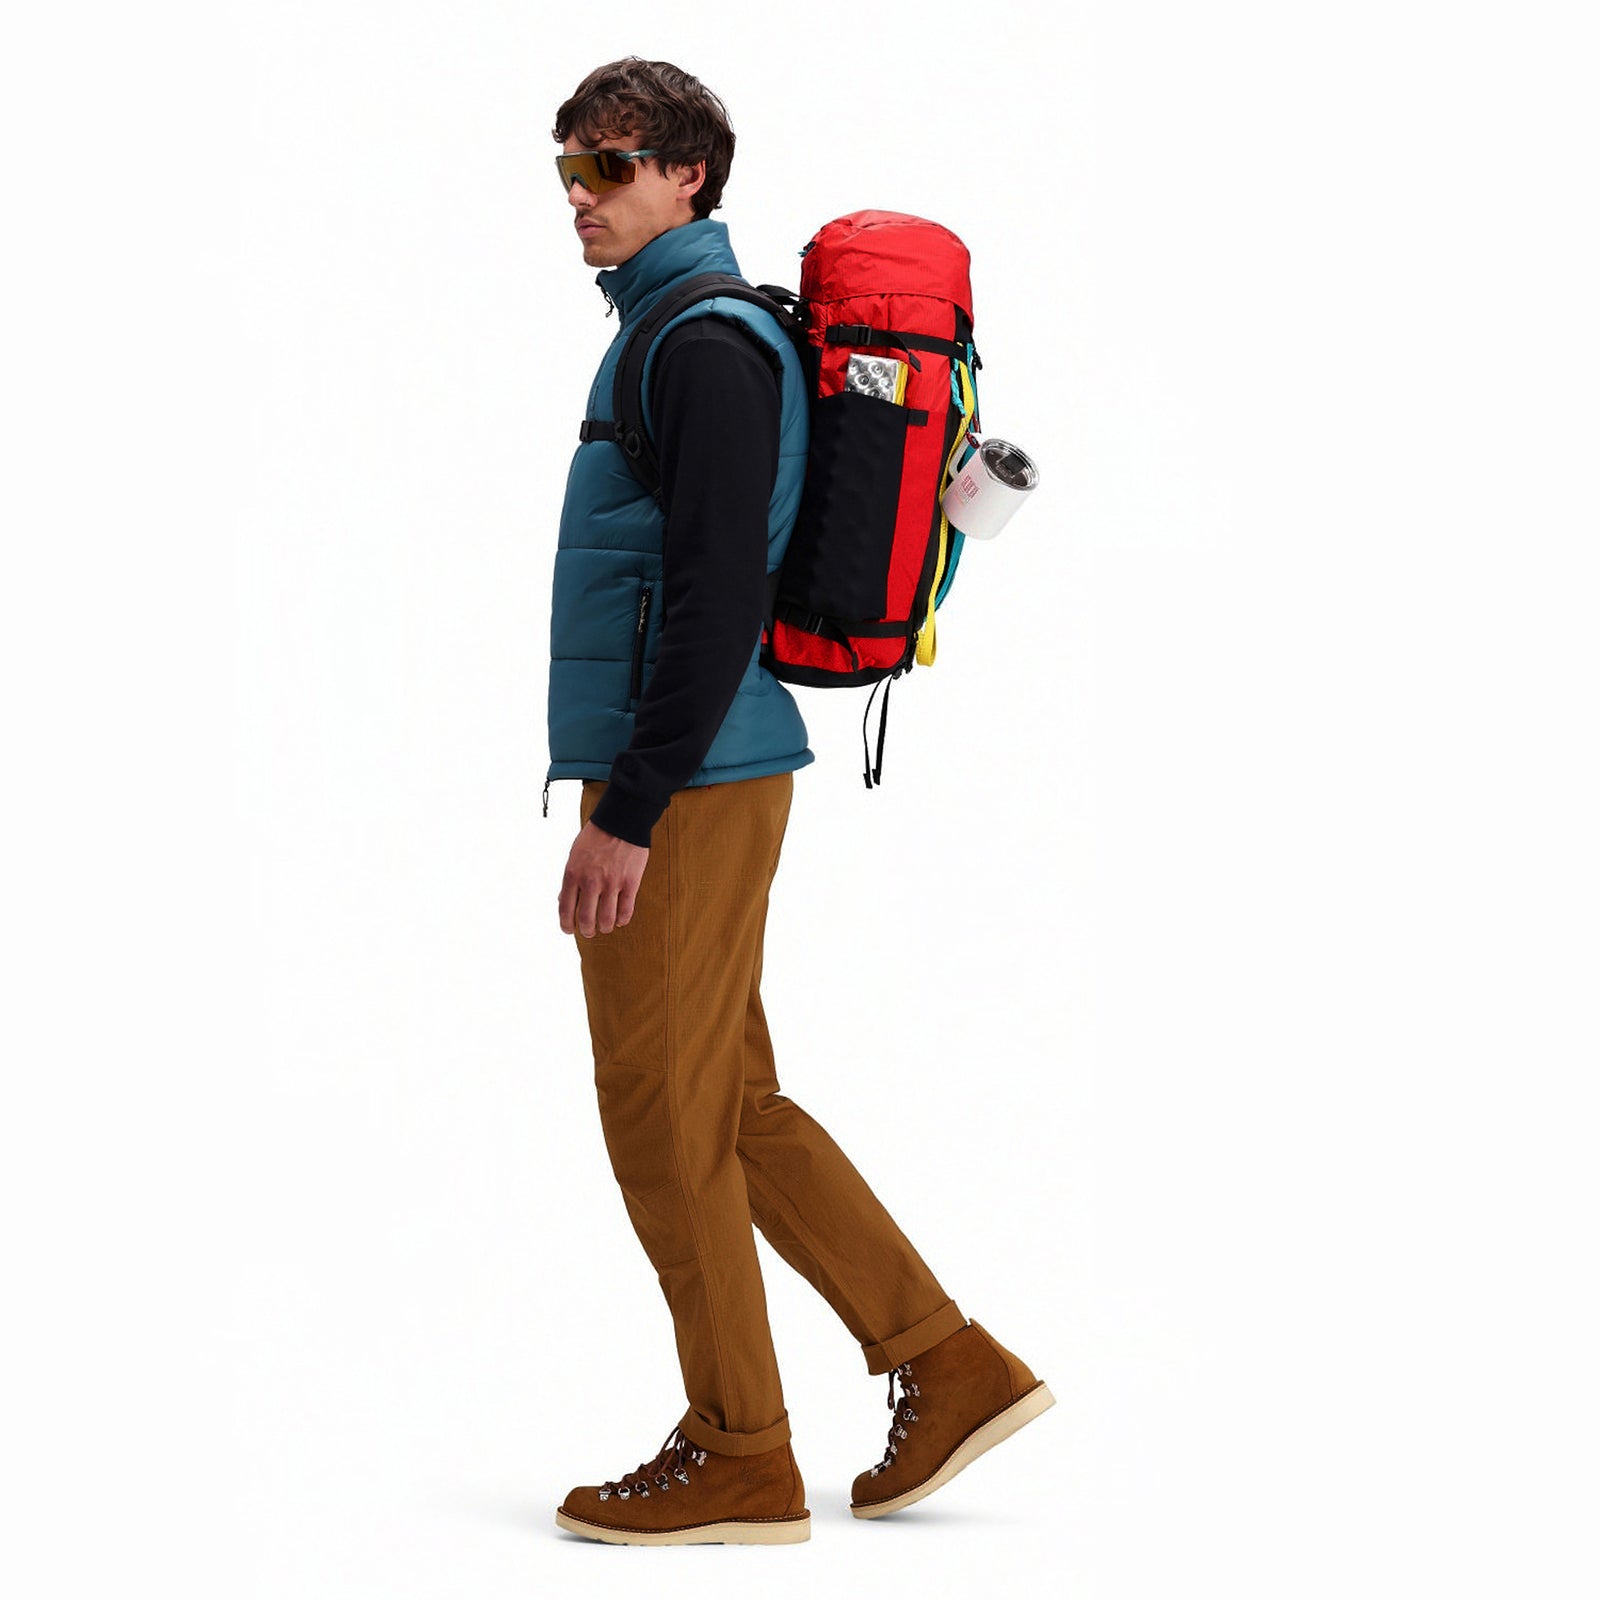 Model wearing Topo Designs Mountain Pack 28L hiking backpack with external laptop sleeve access in lightweight recycled "Red / Turquoise" nylon.